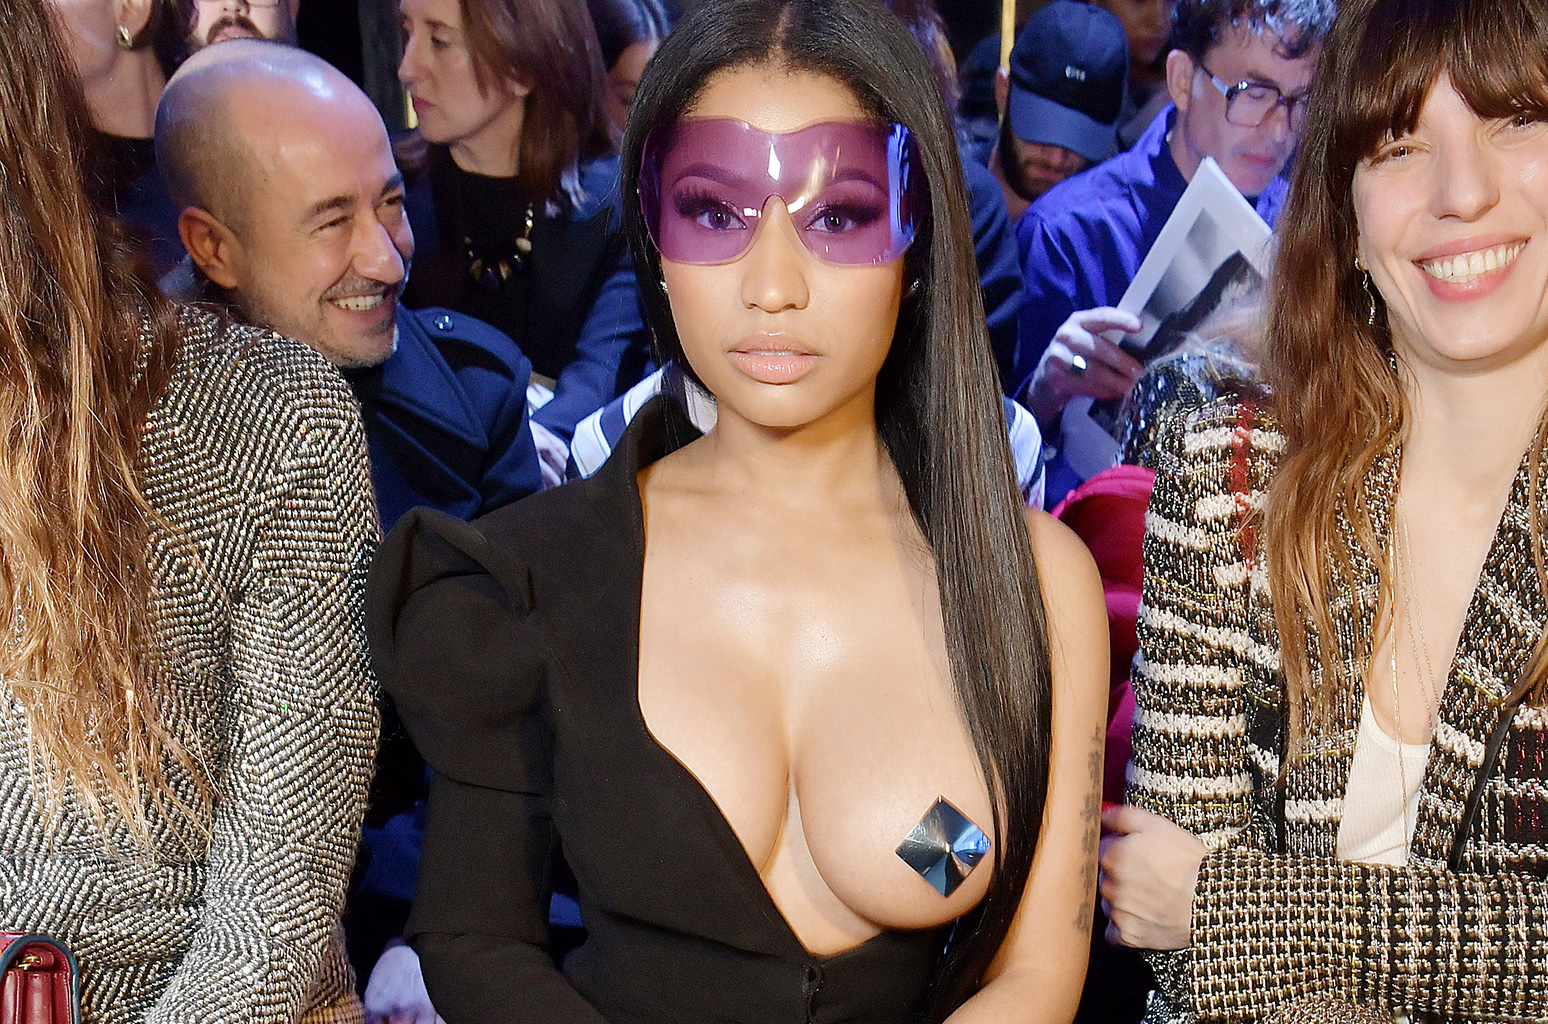 daryl fischer recommends nicki minaj shows off her boobs pic